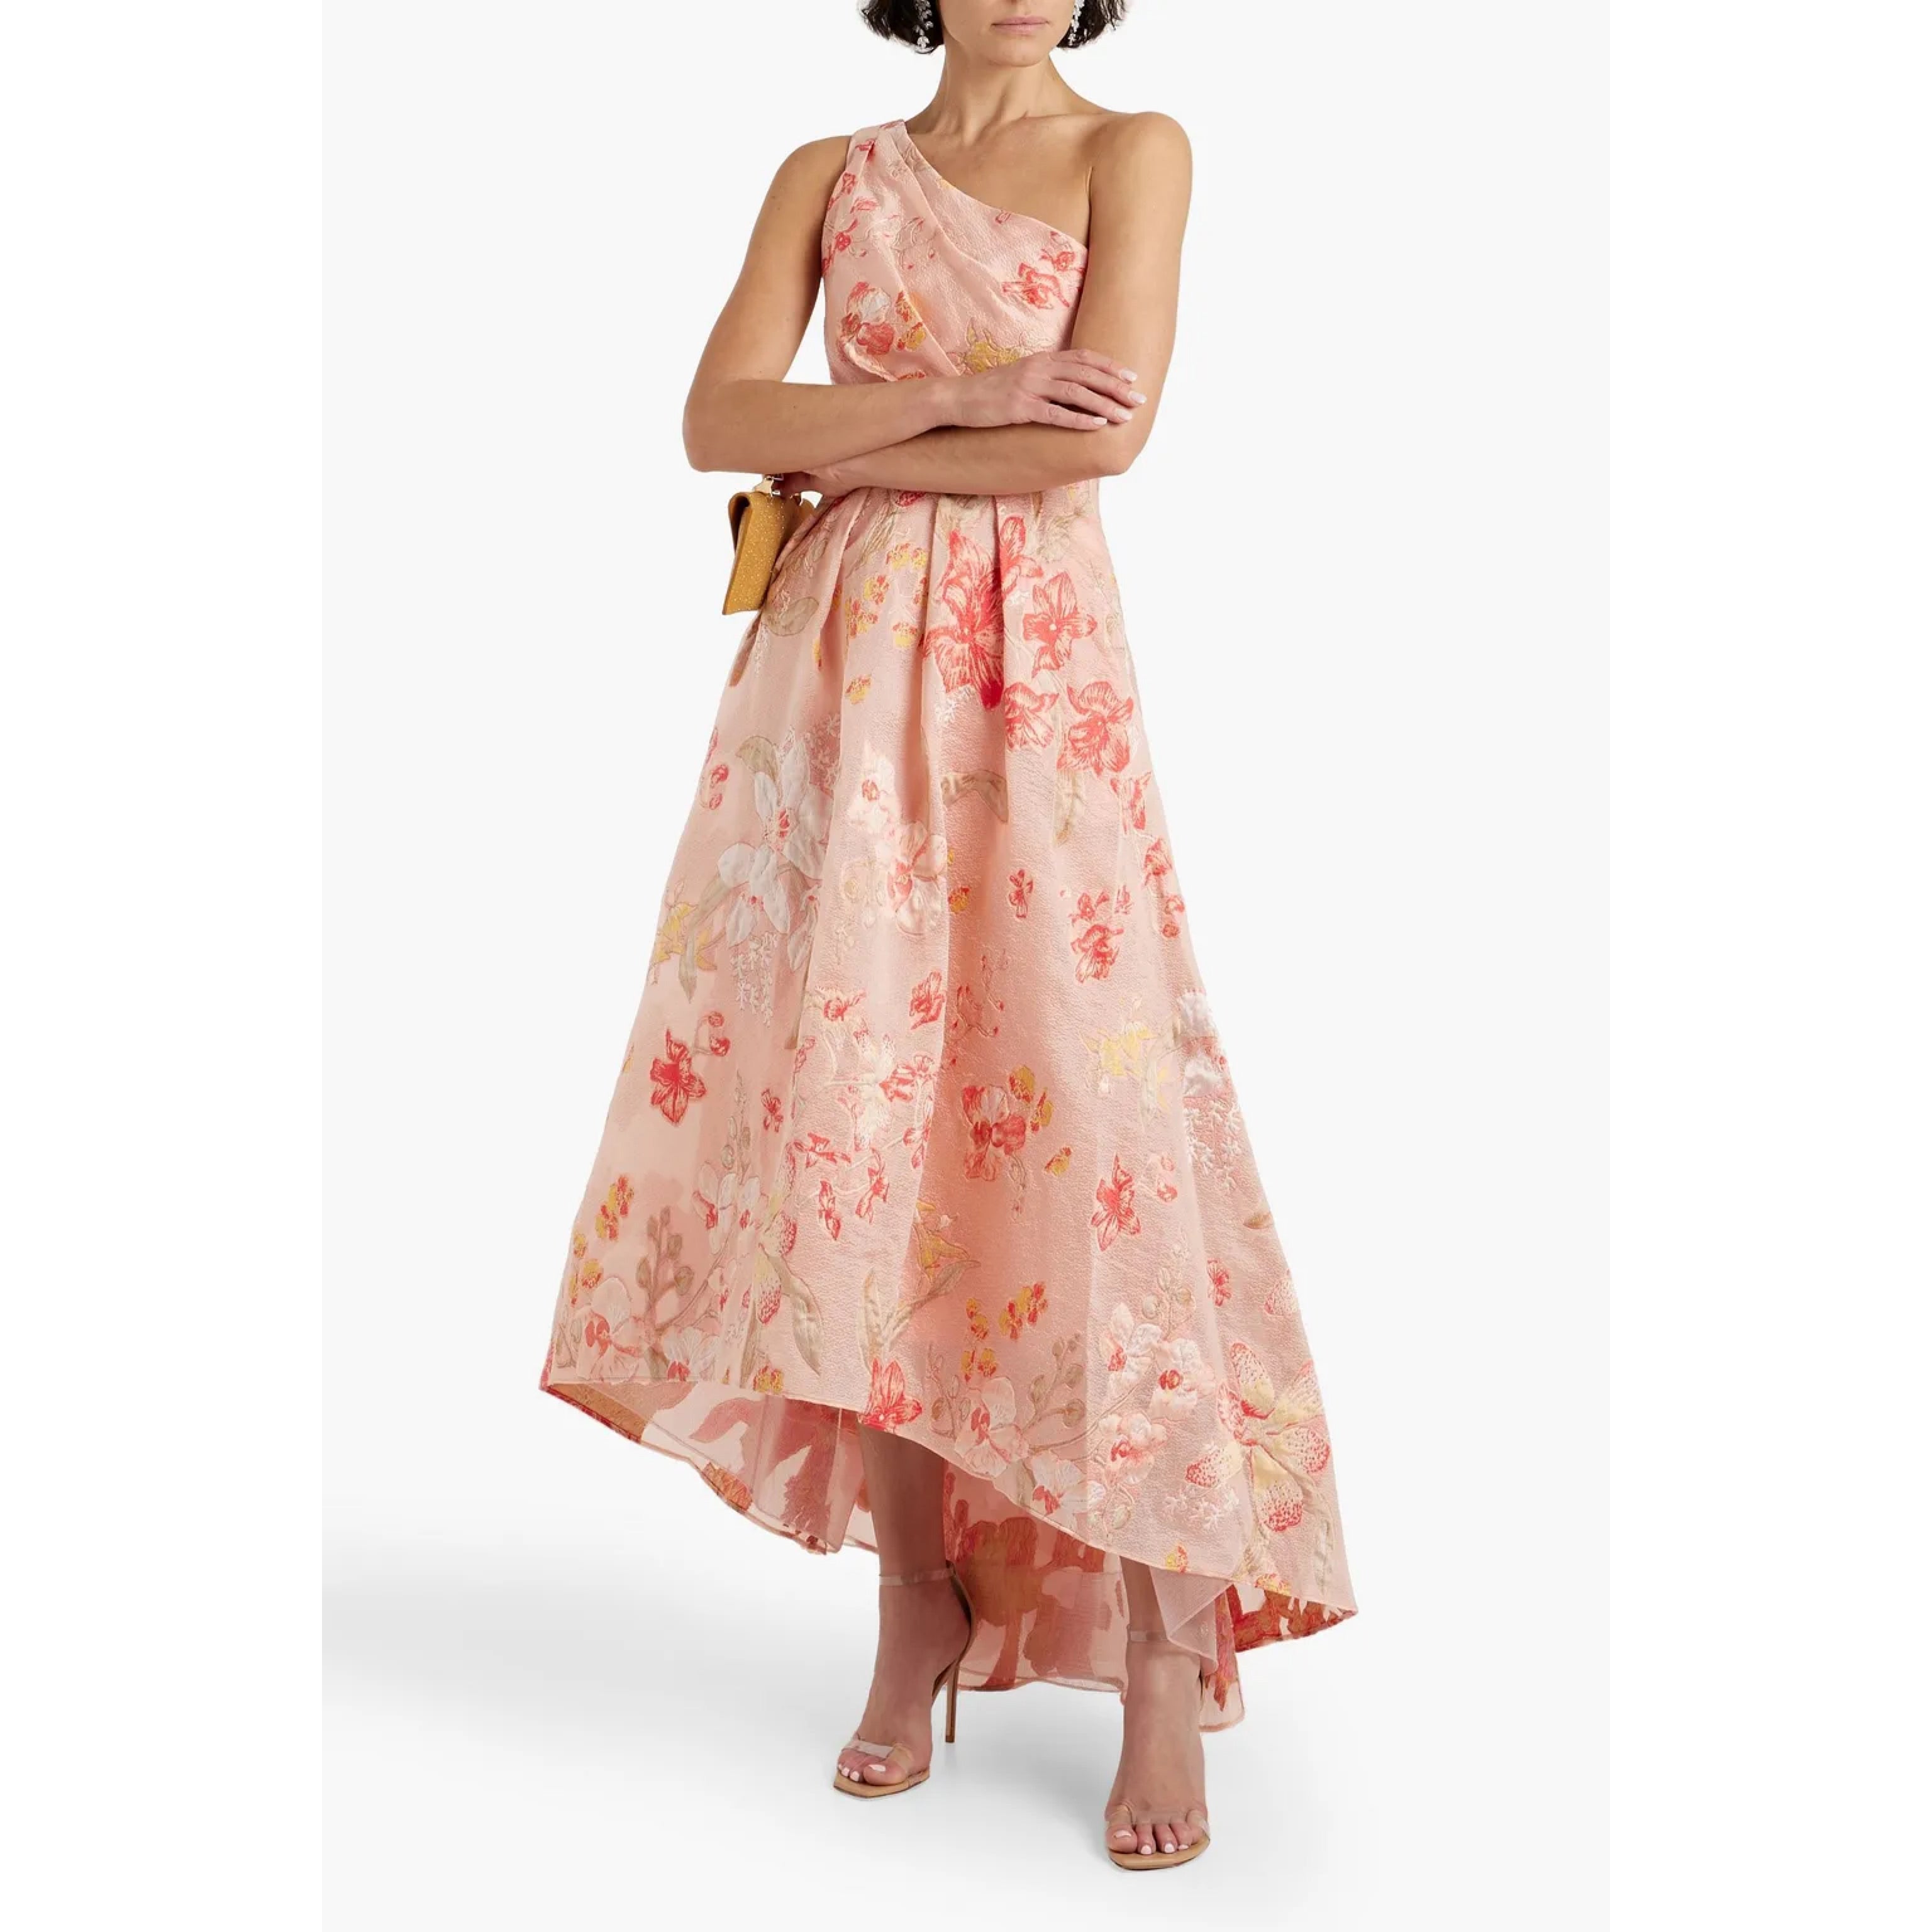 Marchesa Notte peach floral dress, size 6, NEW WITH TAGS!